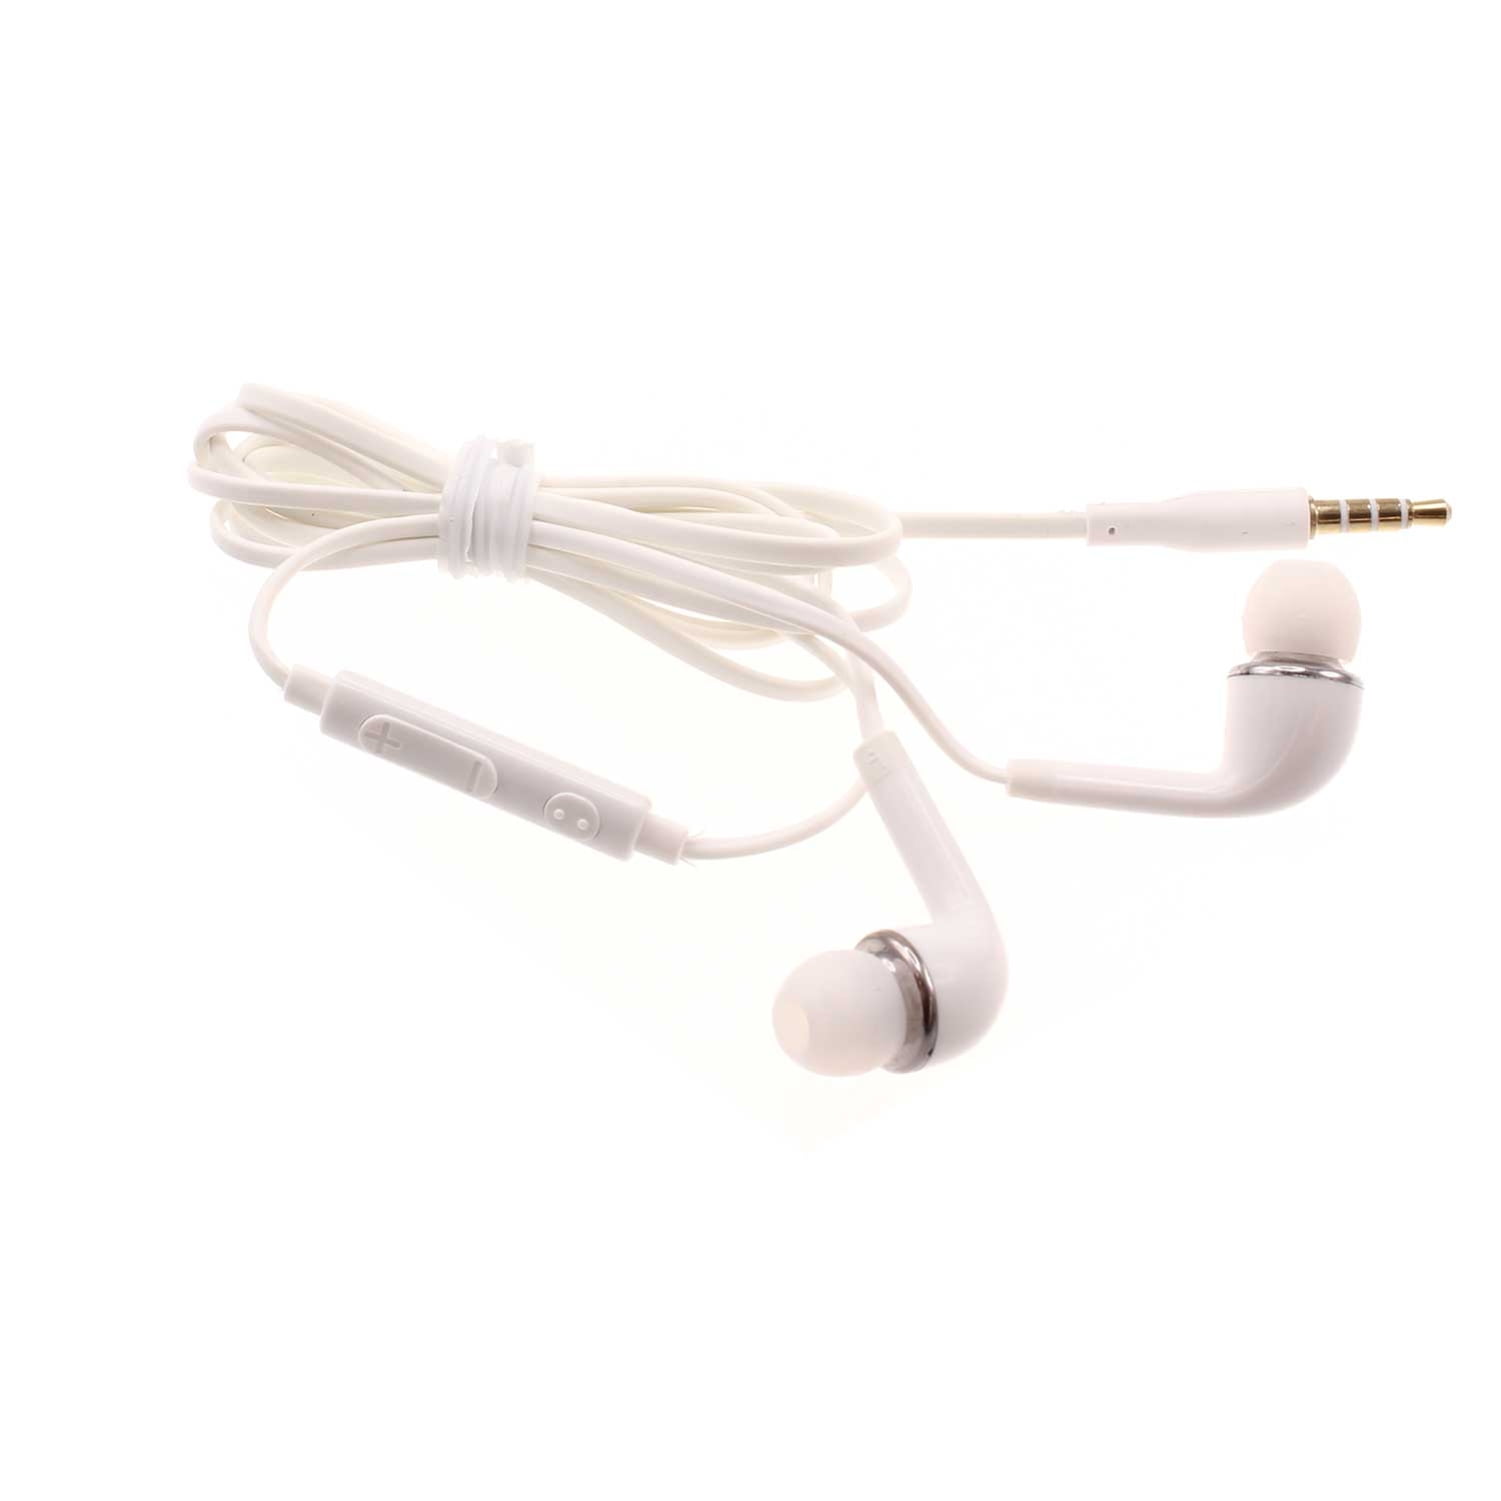 Samsung EHS64AVFWE Earphone/Headphone Replacement Clear/Gray Ear Gels Buds ONLY 